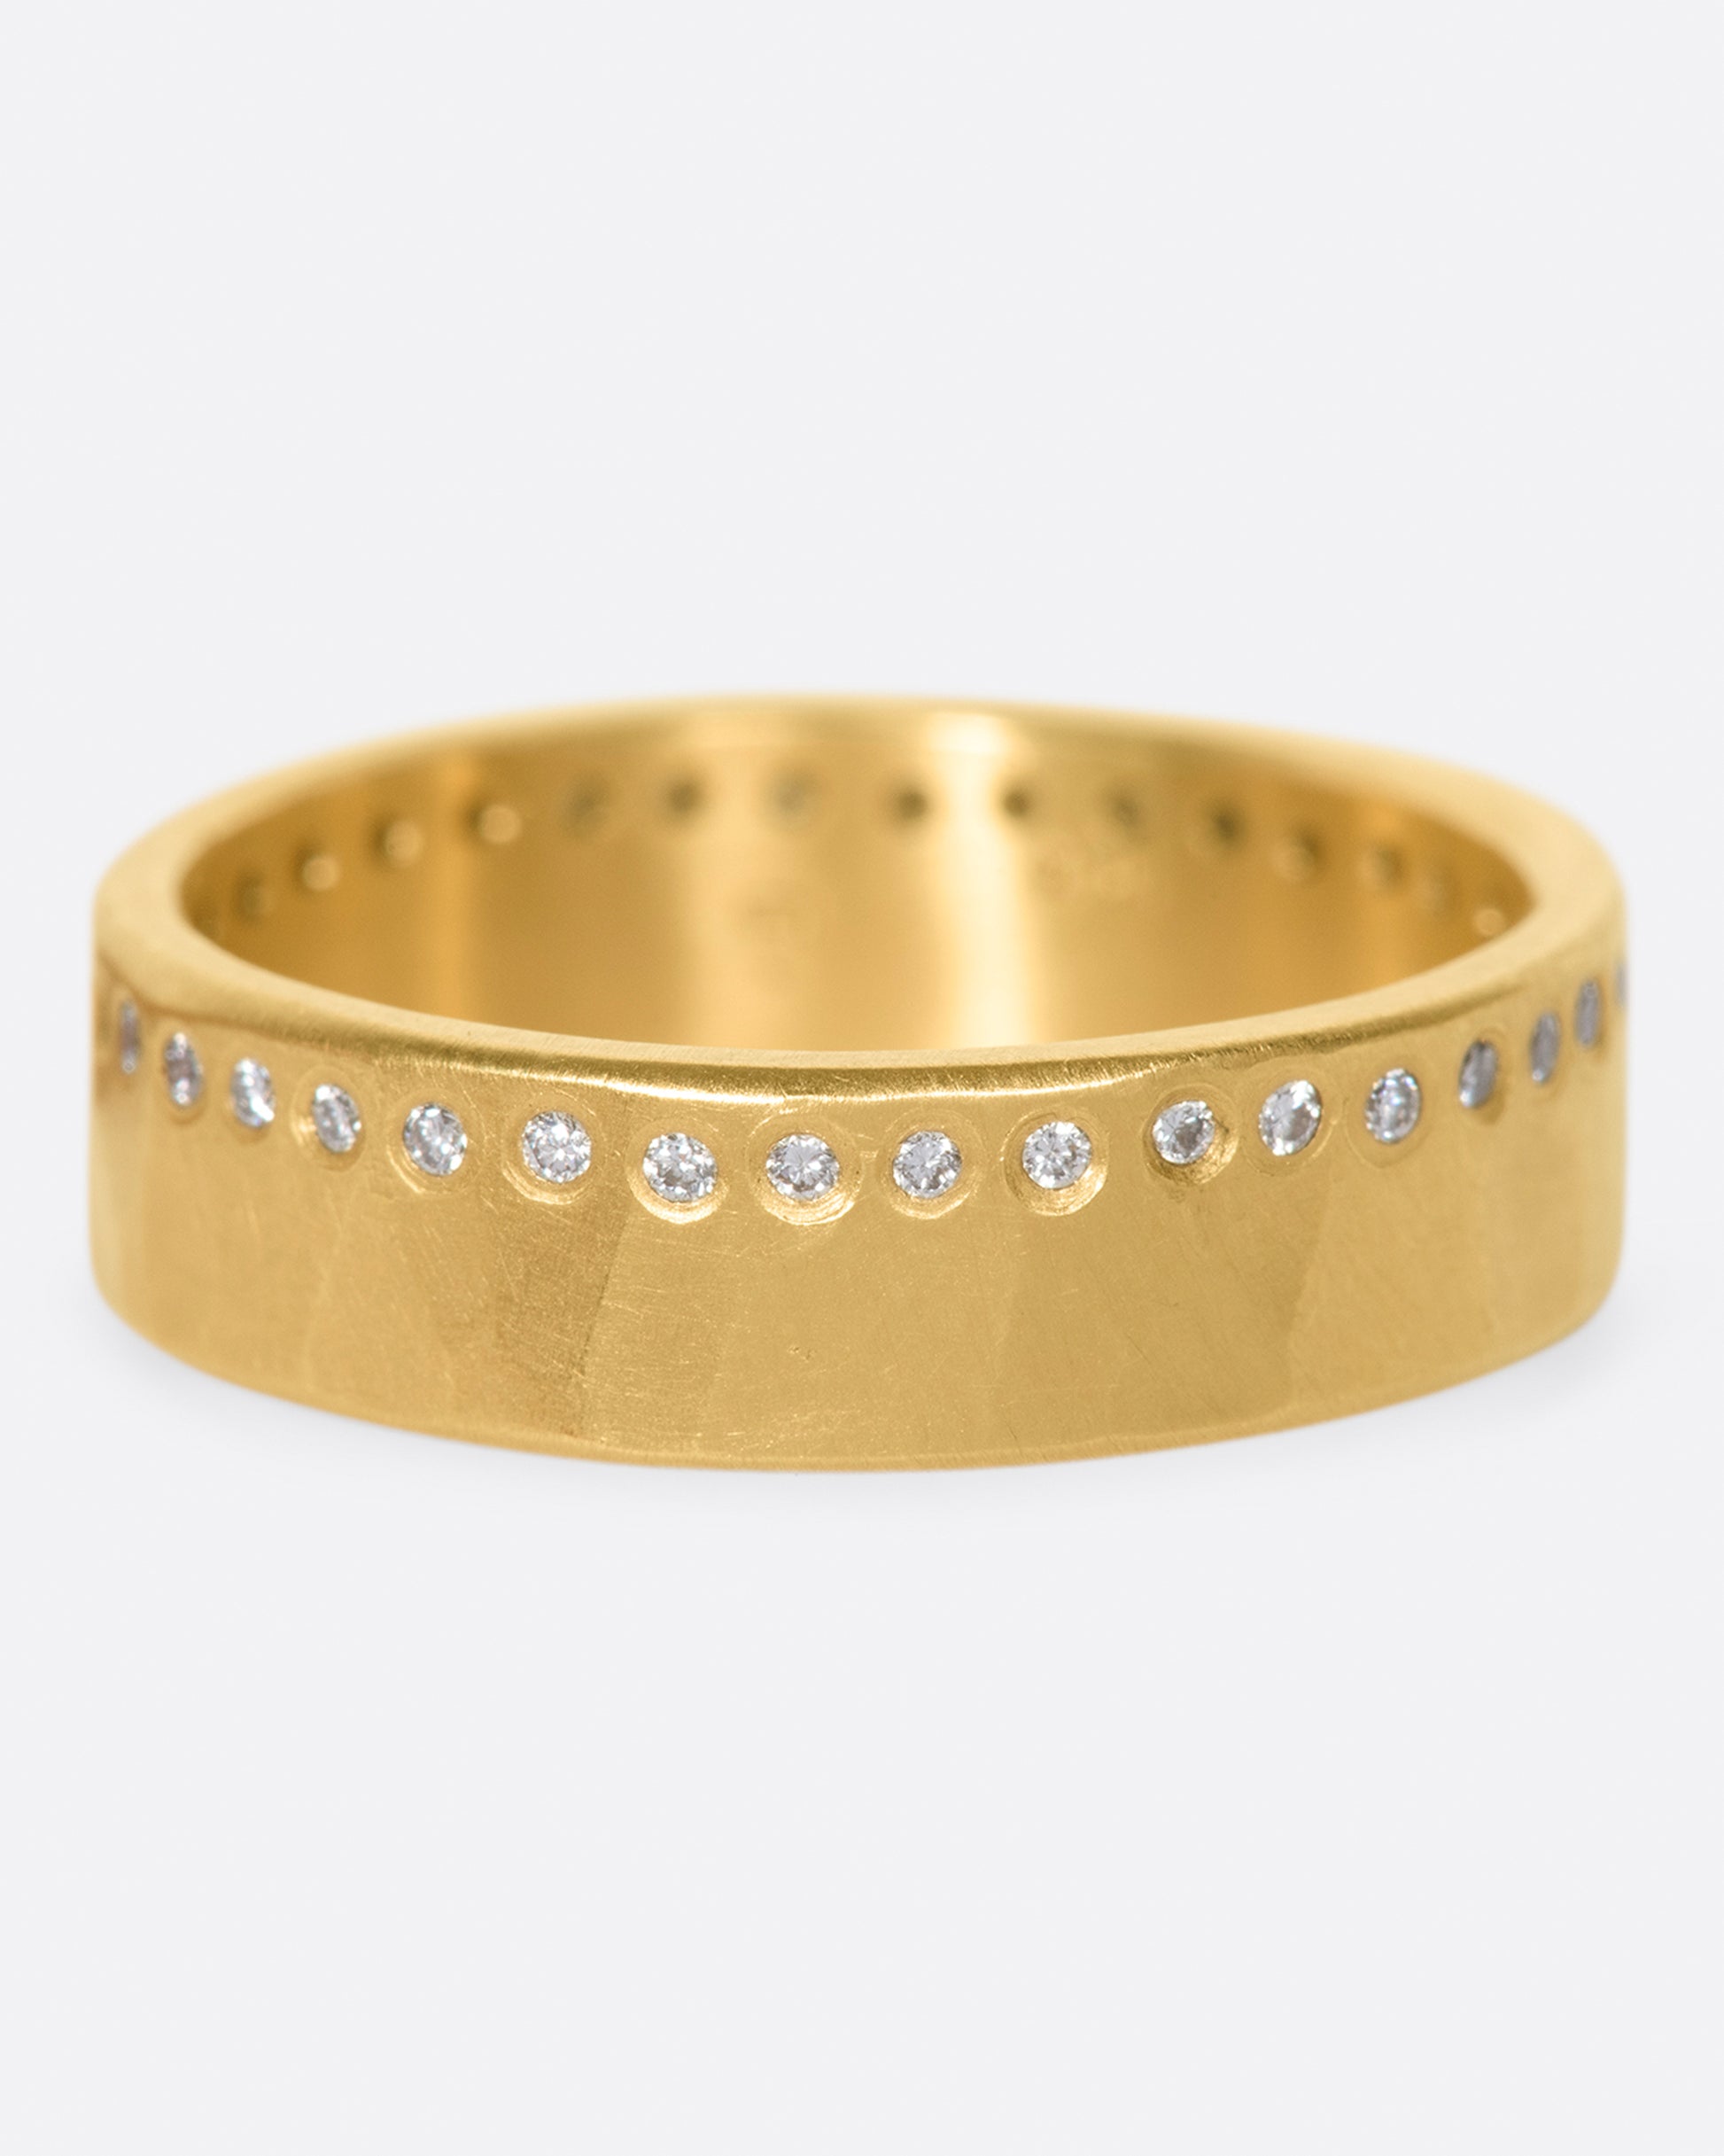 A hammered, matte gold band with a line of round diamonds all the way around.